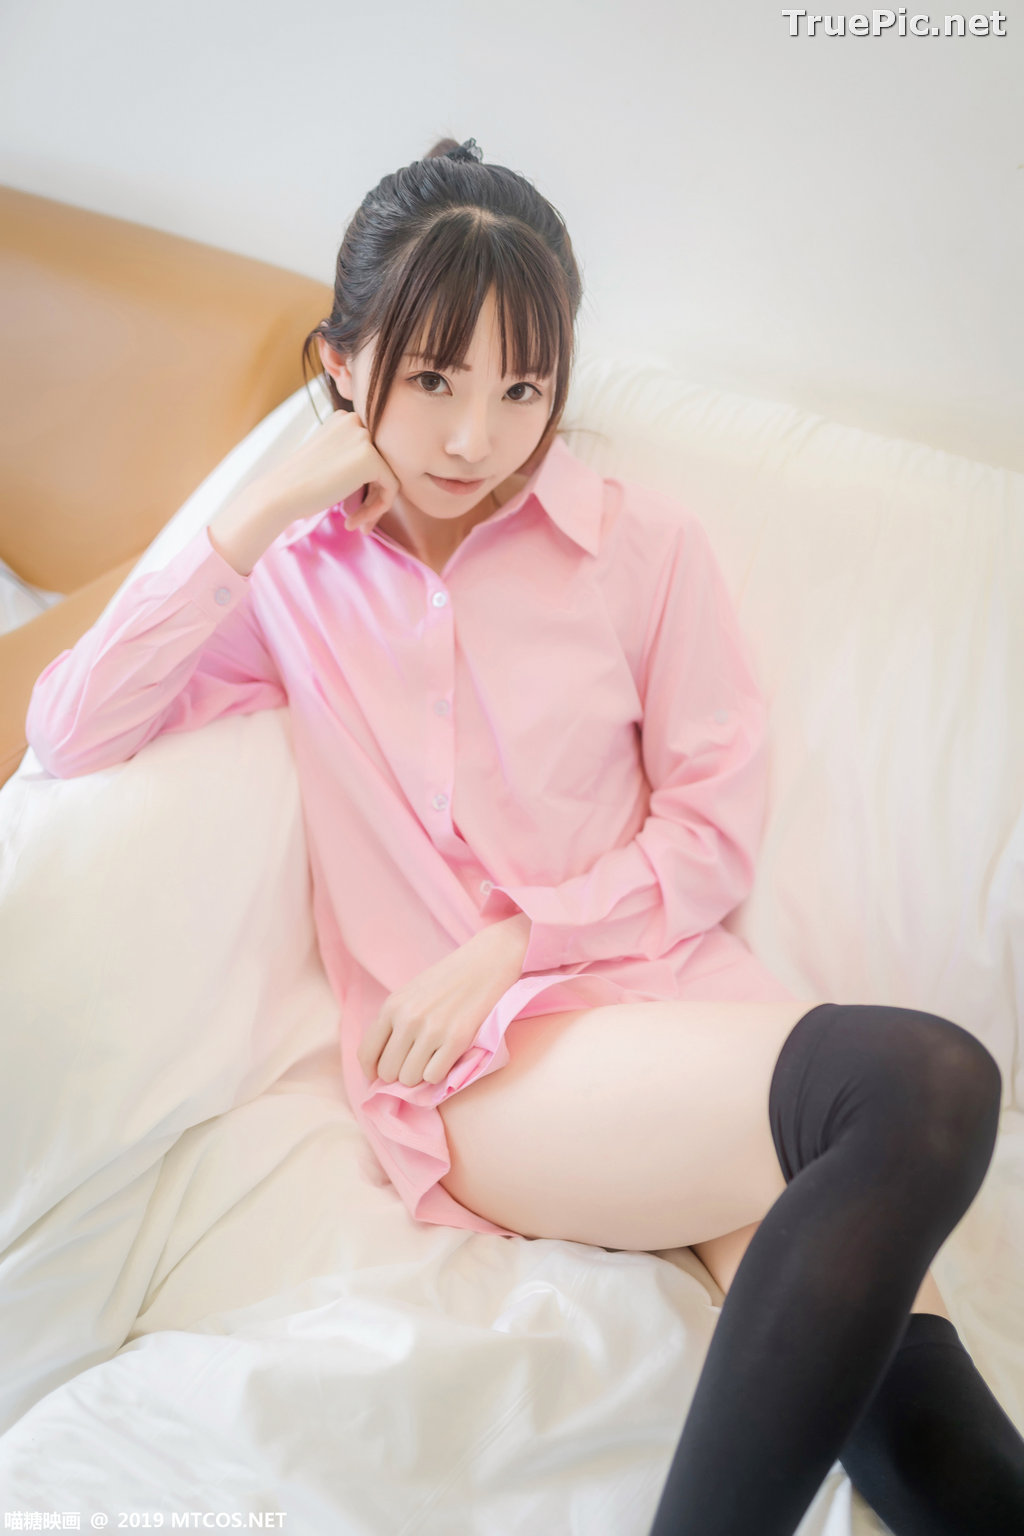 Image [MTCos] 喵糖映画 Vol.022 – Chinese Model – Pink Shirt and Black Stockings - TruePic.net - Picture-36